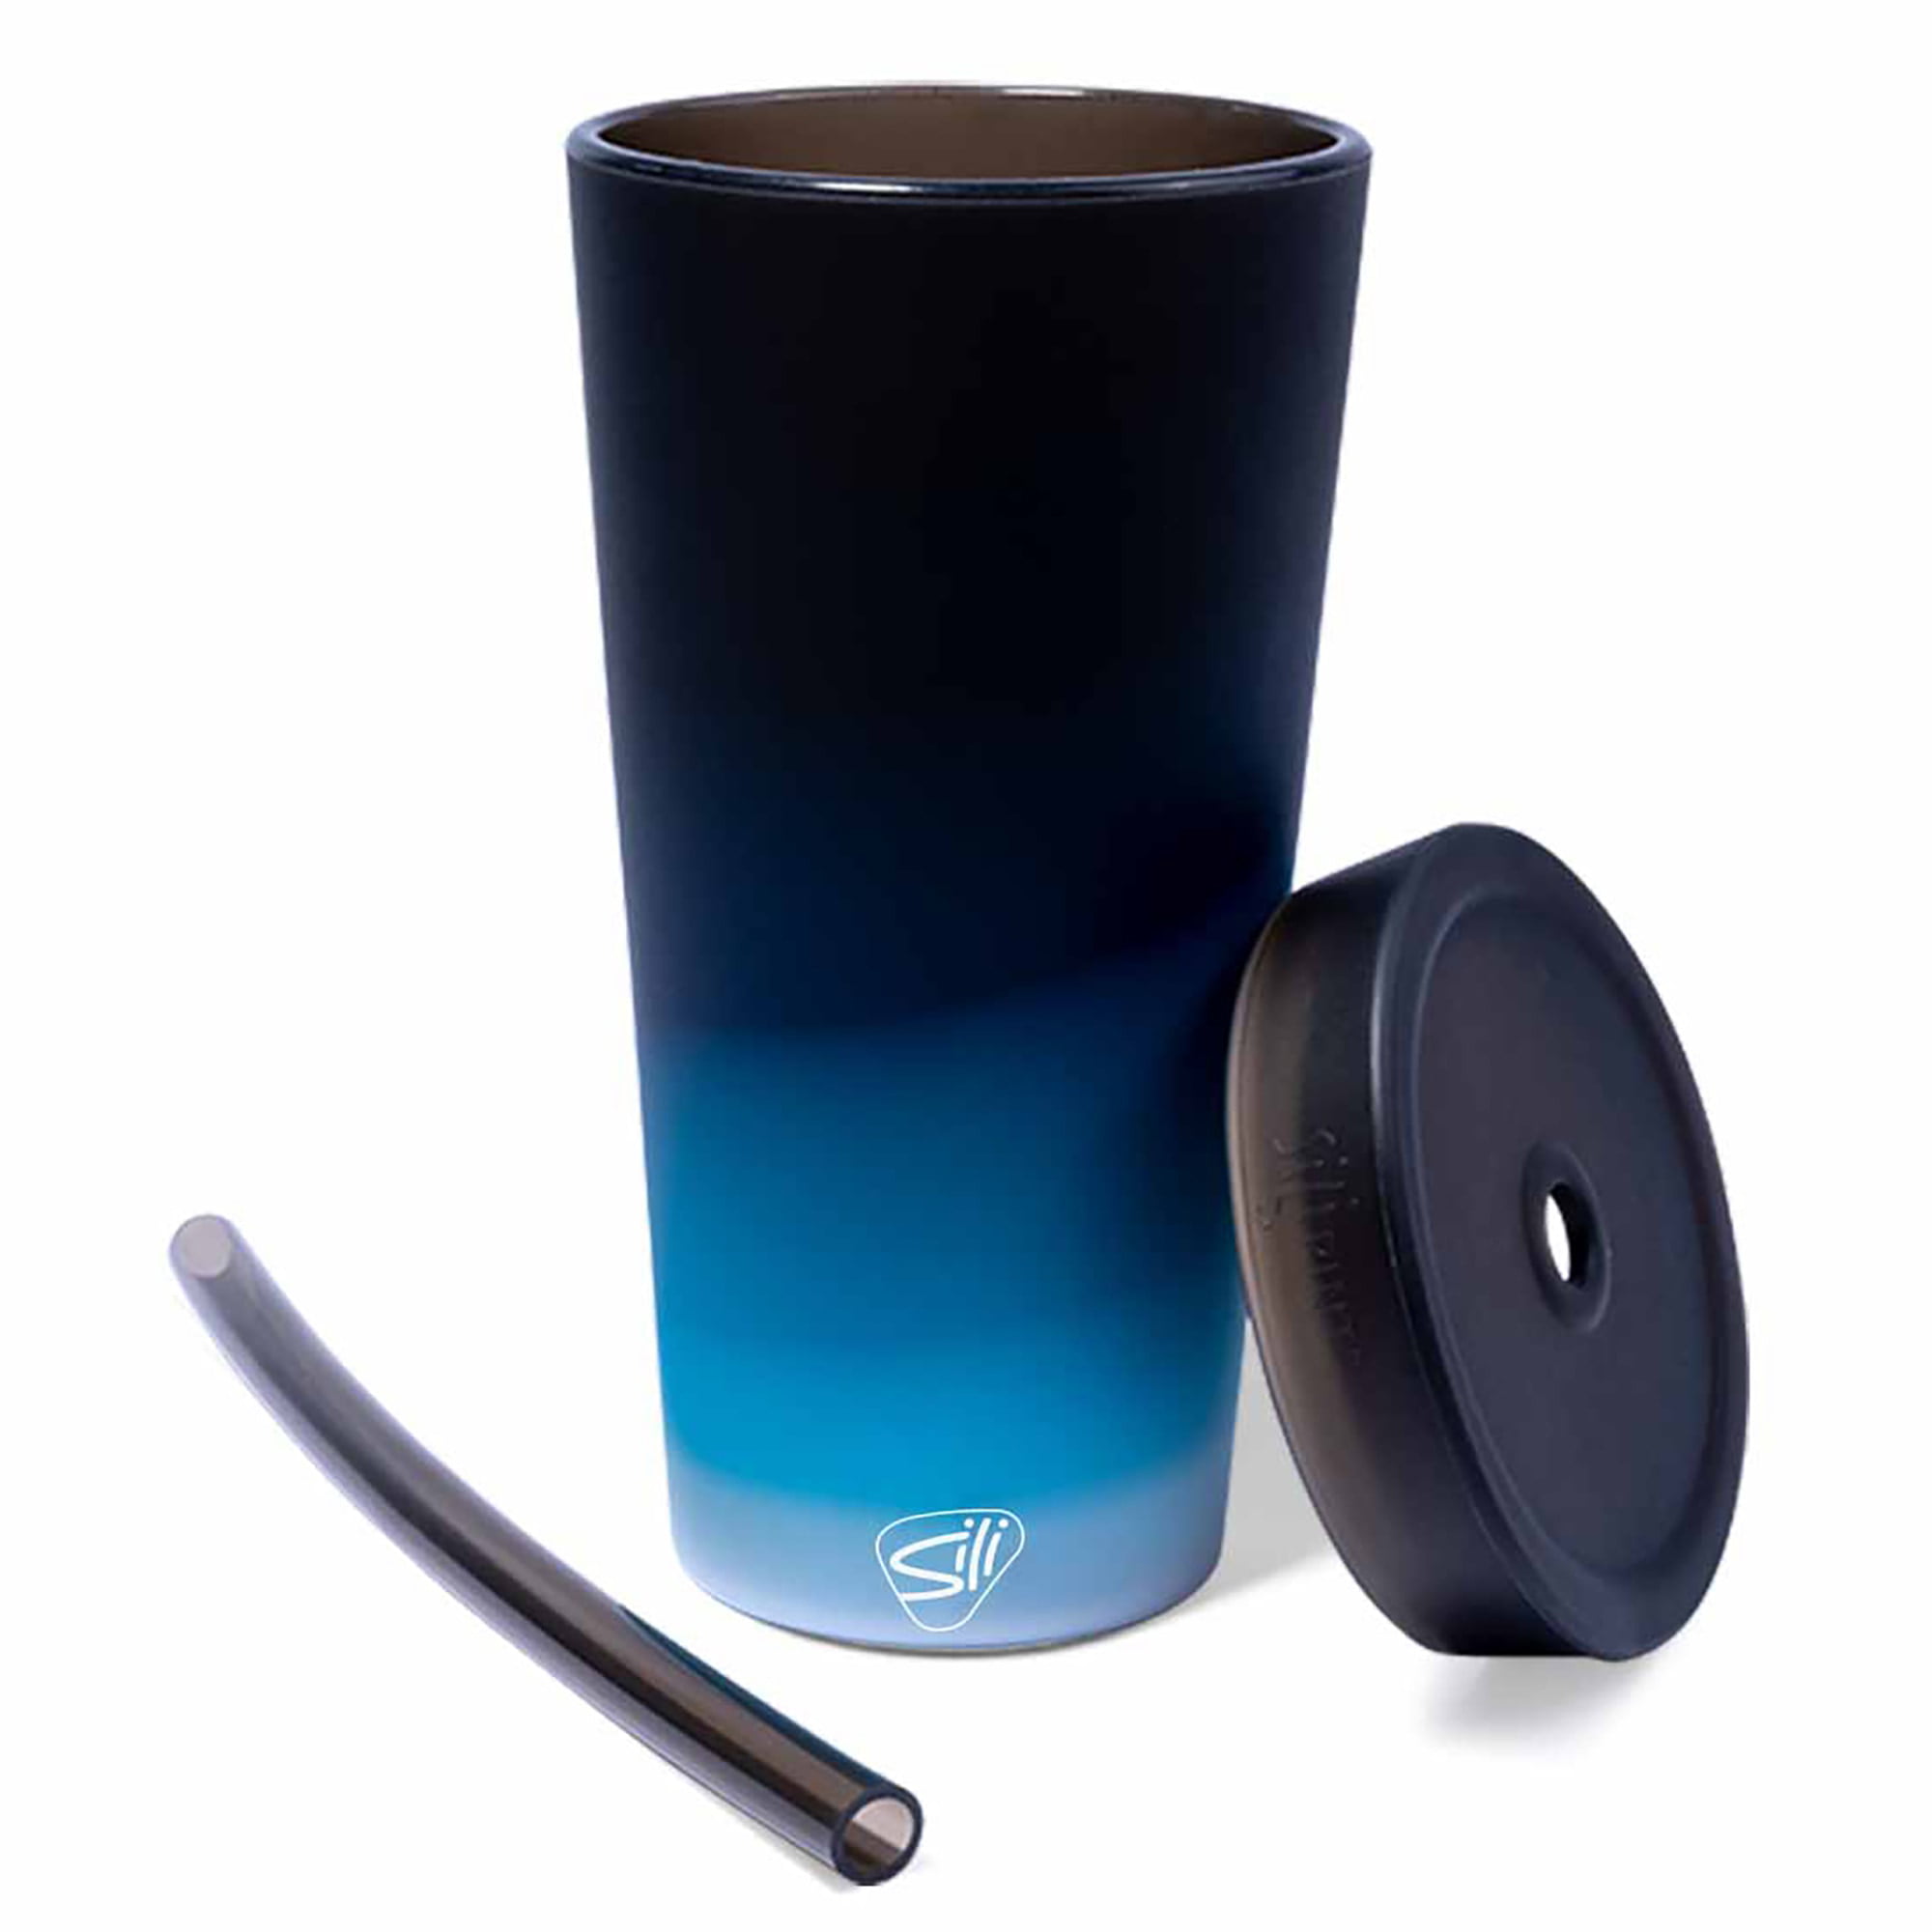 ATM 22oz Silicone Straw Tumbler - The Warehouse at C.C. Creations